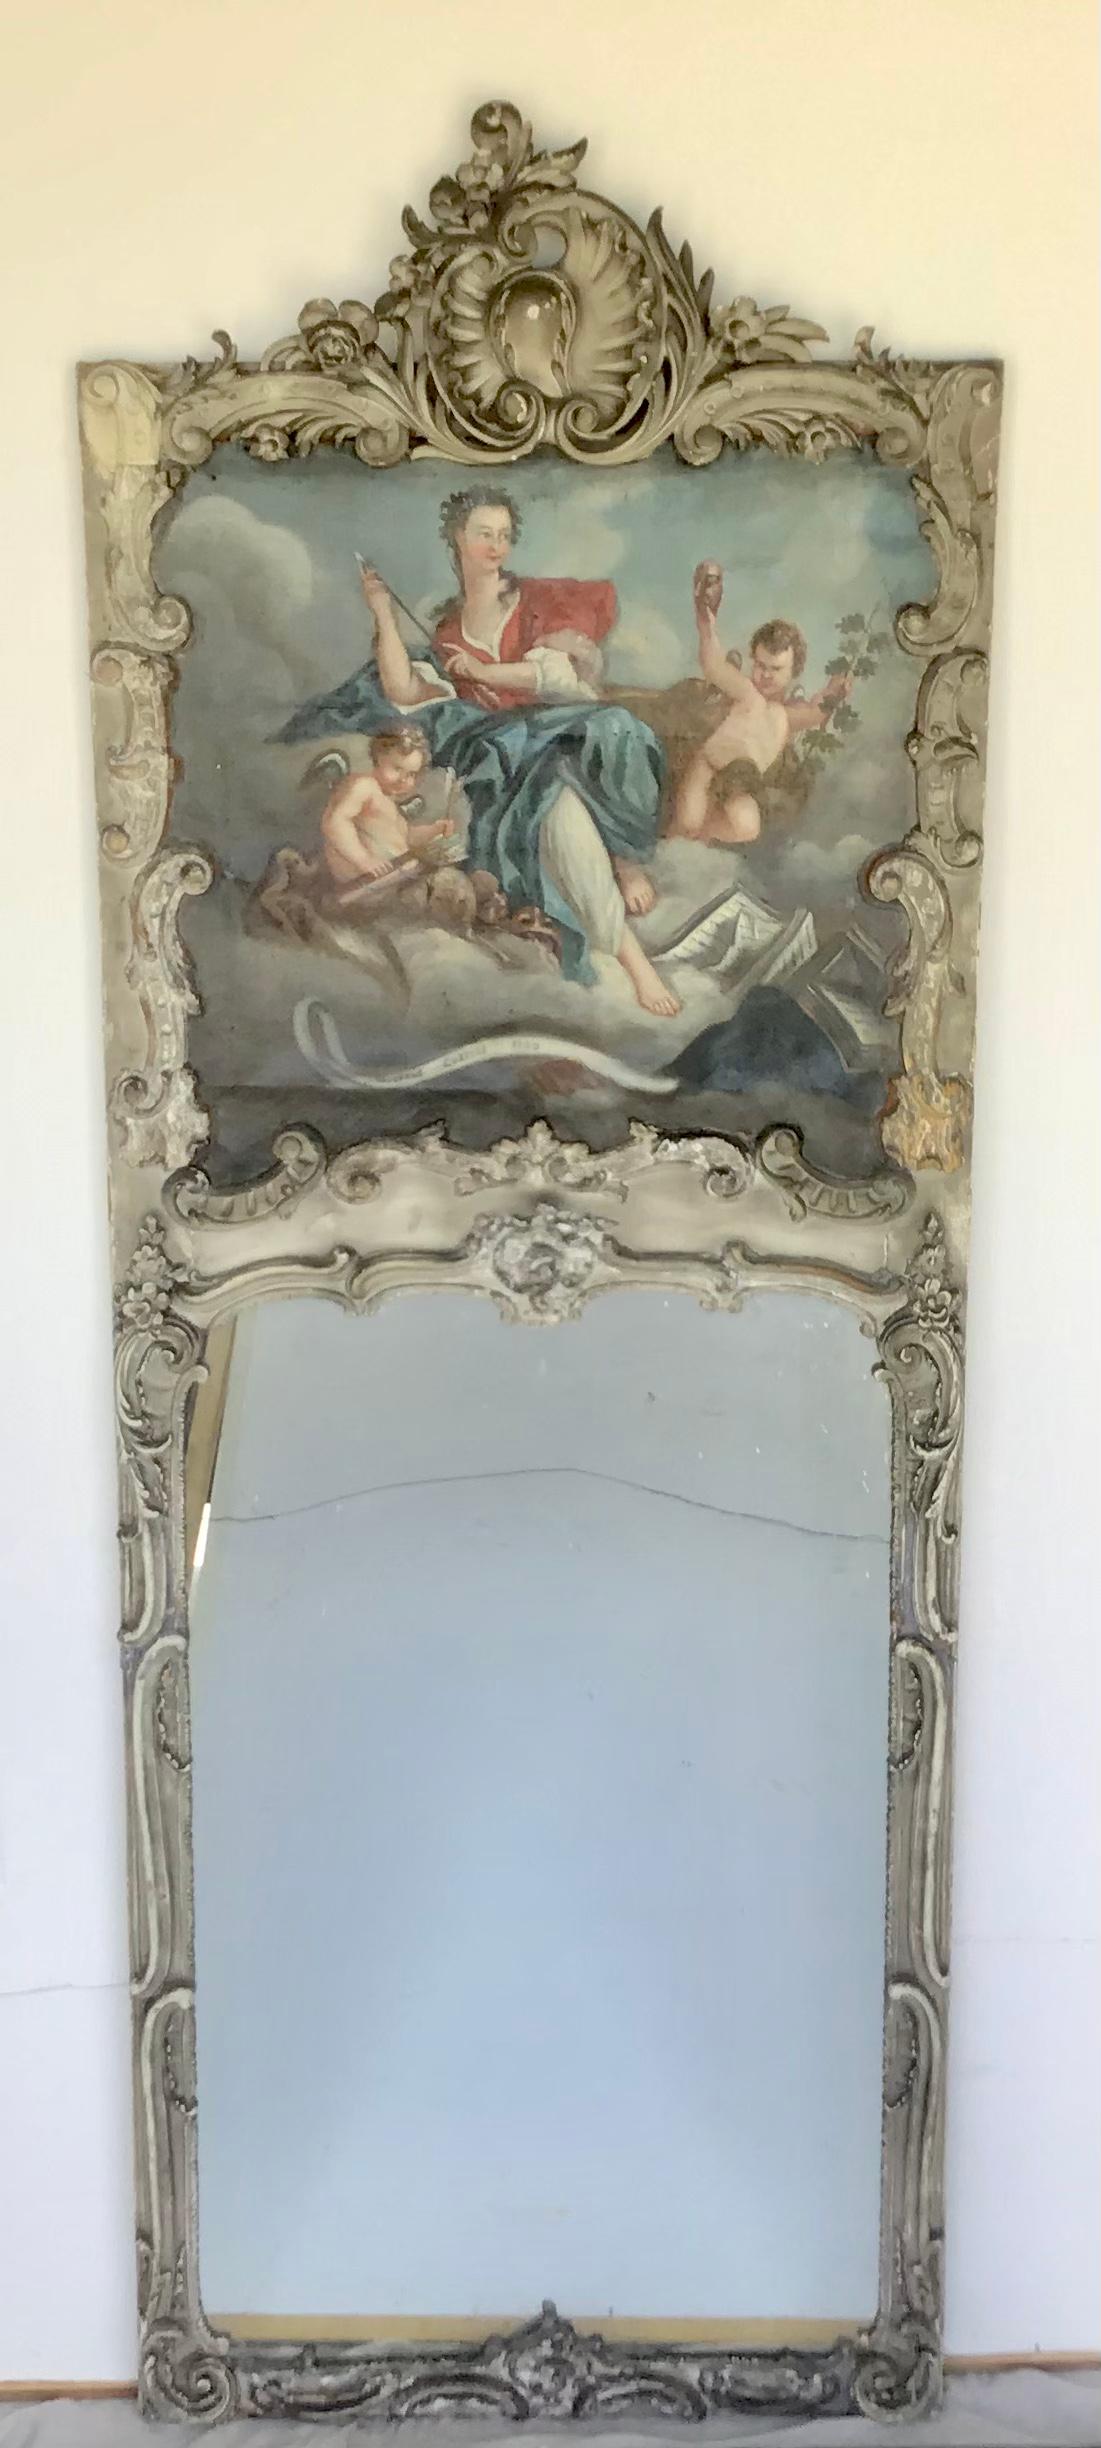 19th century French Louis XV painted trumeau combines a brilliantly hand carved frame surrounding a stunning painting depicting a maiden and cherubs in the clouds. The frame has a wonderful patinaed painted finish that highlights the contours and